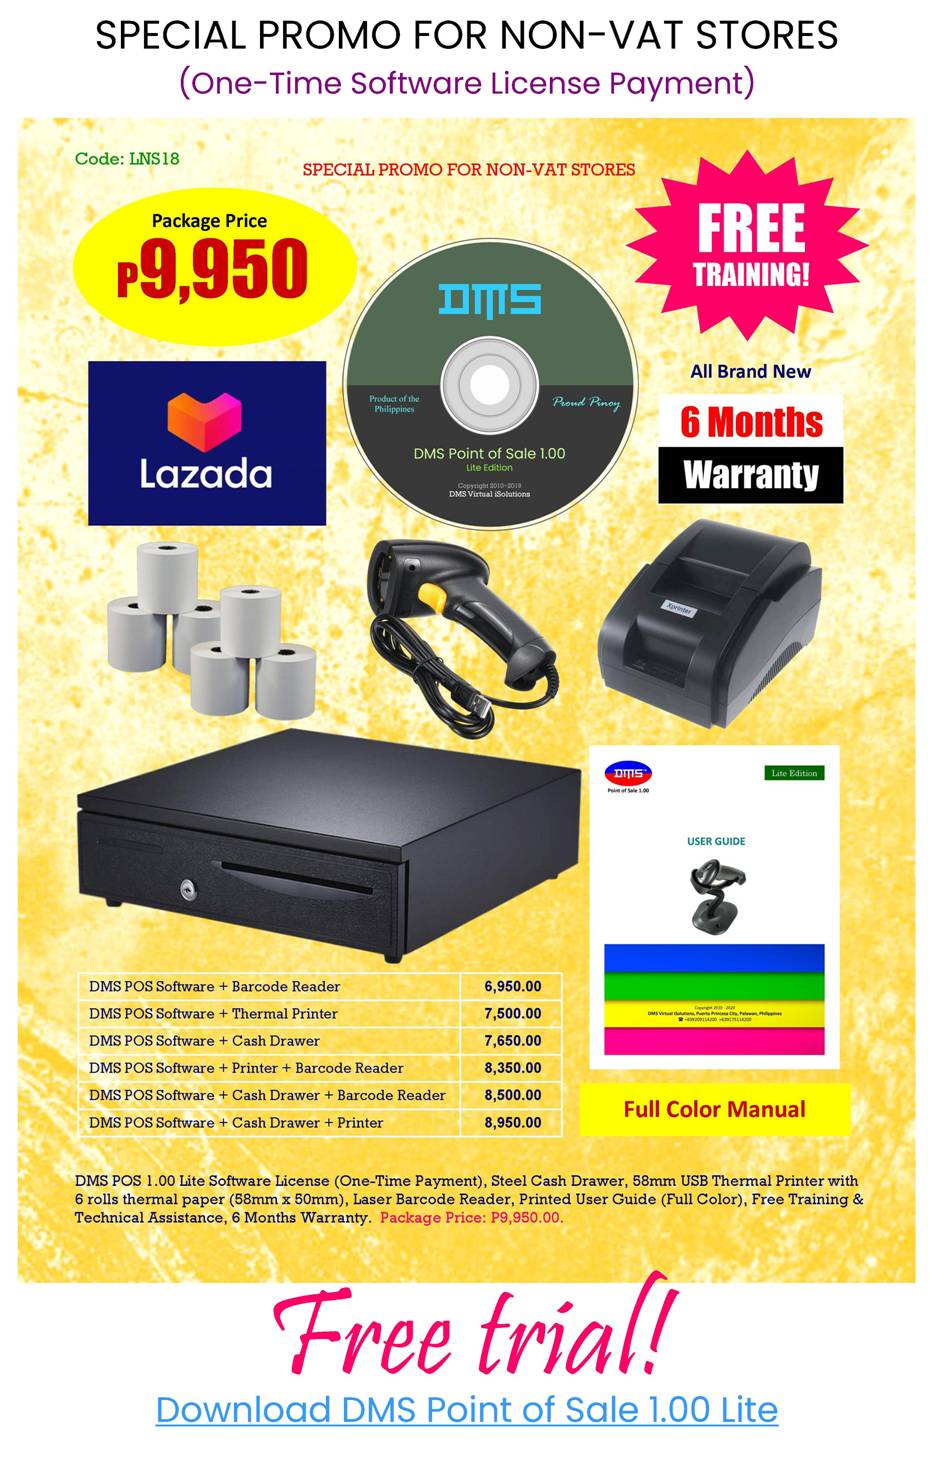 DMS Point of Sale 1.00 Lite Promo